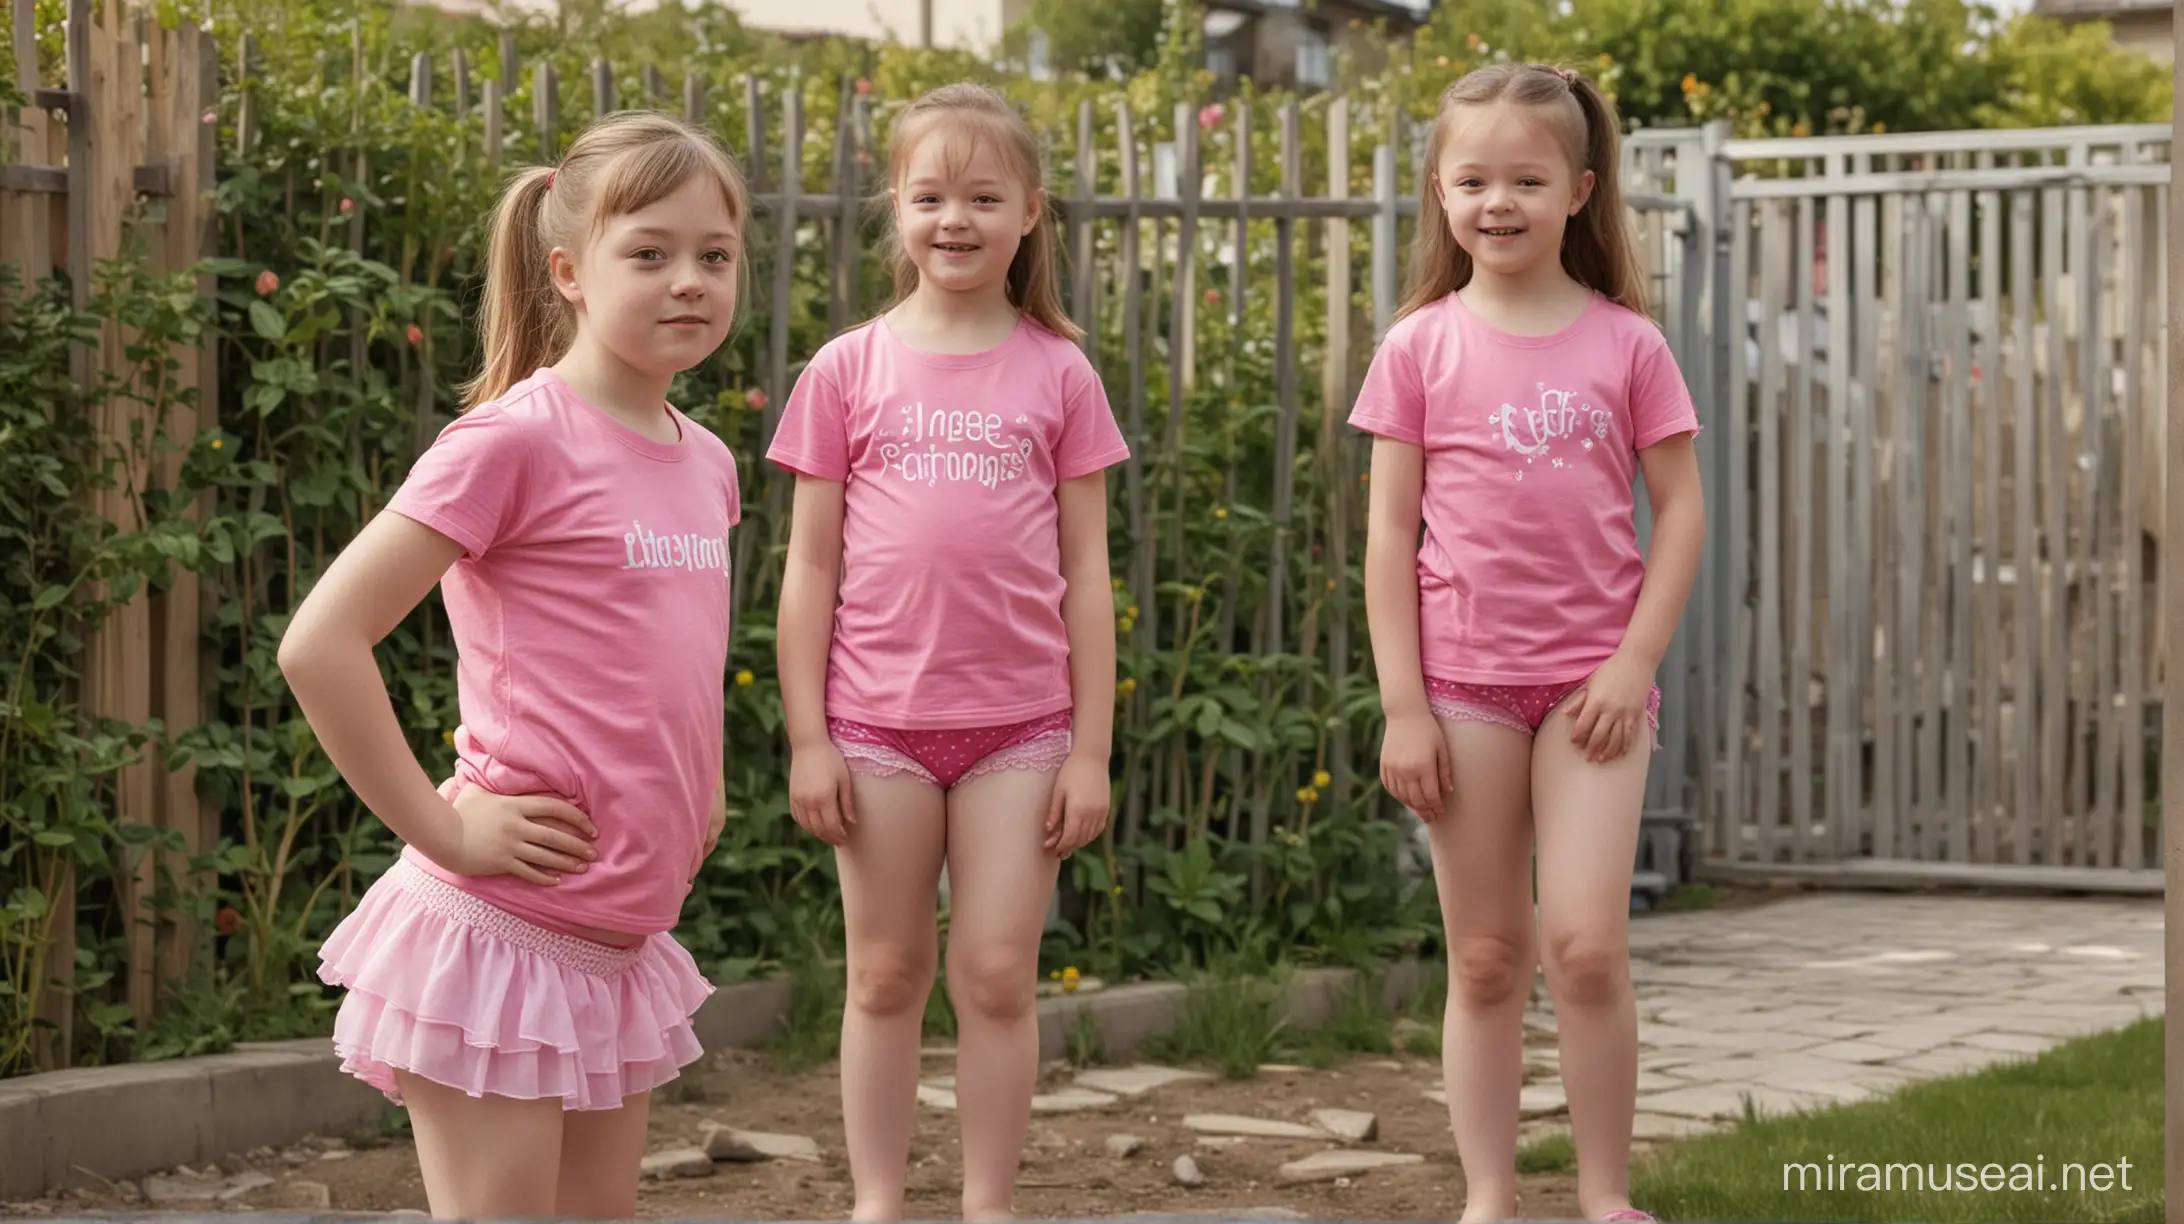 Photorealistic picture of an 11-years-old girl with down syndrome in the yard, she is wearing pink panties and a pink t-shirt